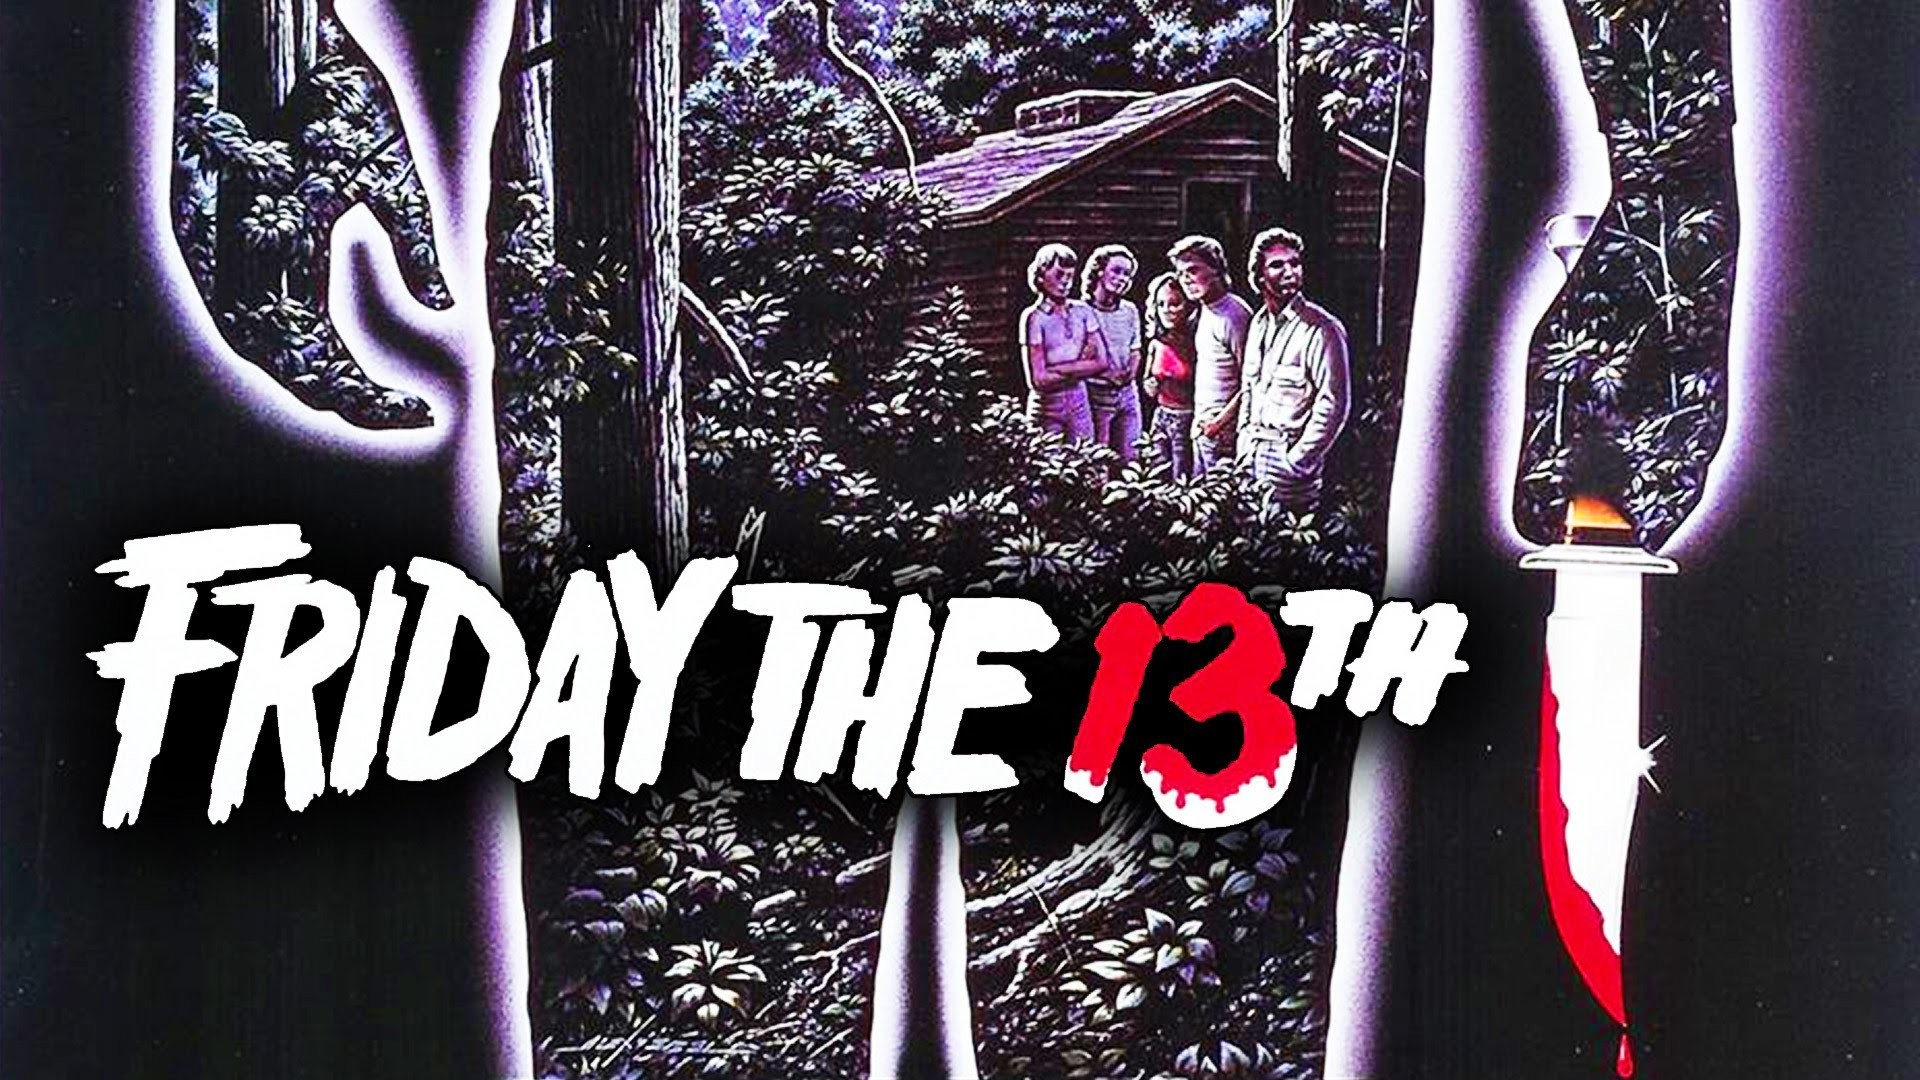 1920x1080 'Friday the 13th' Movie Run Returns To Its Blairstown Roots This Friday!